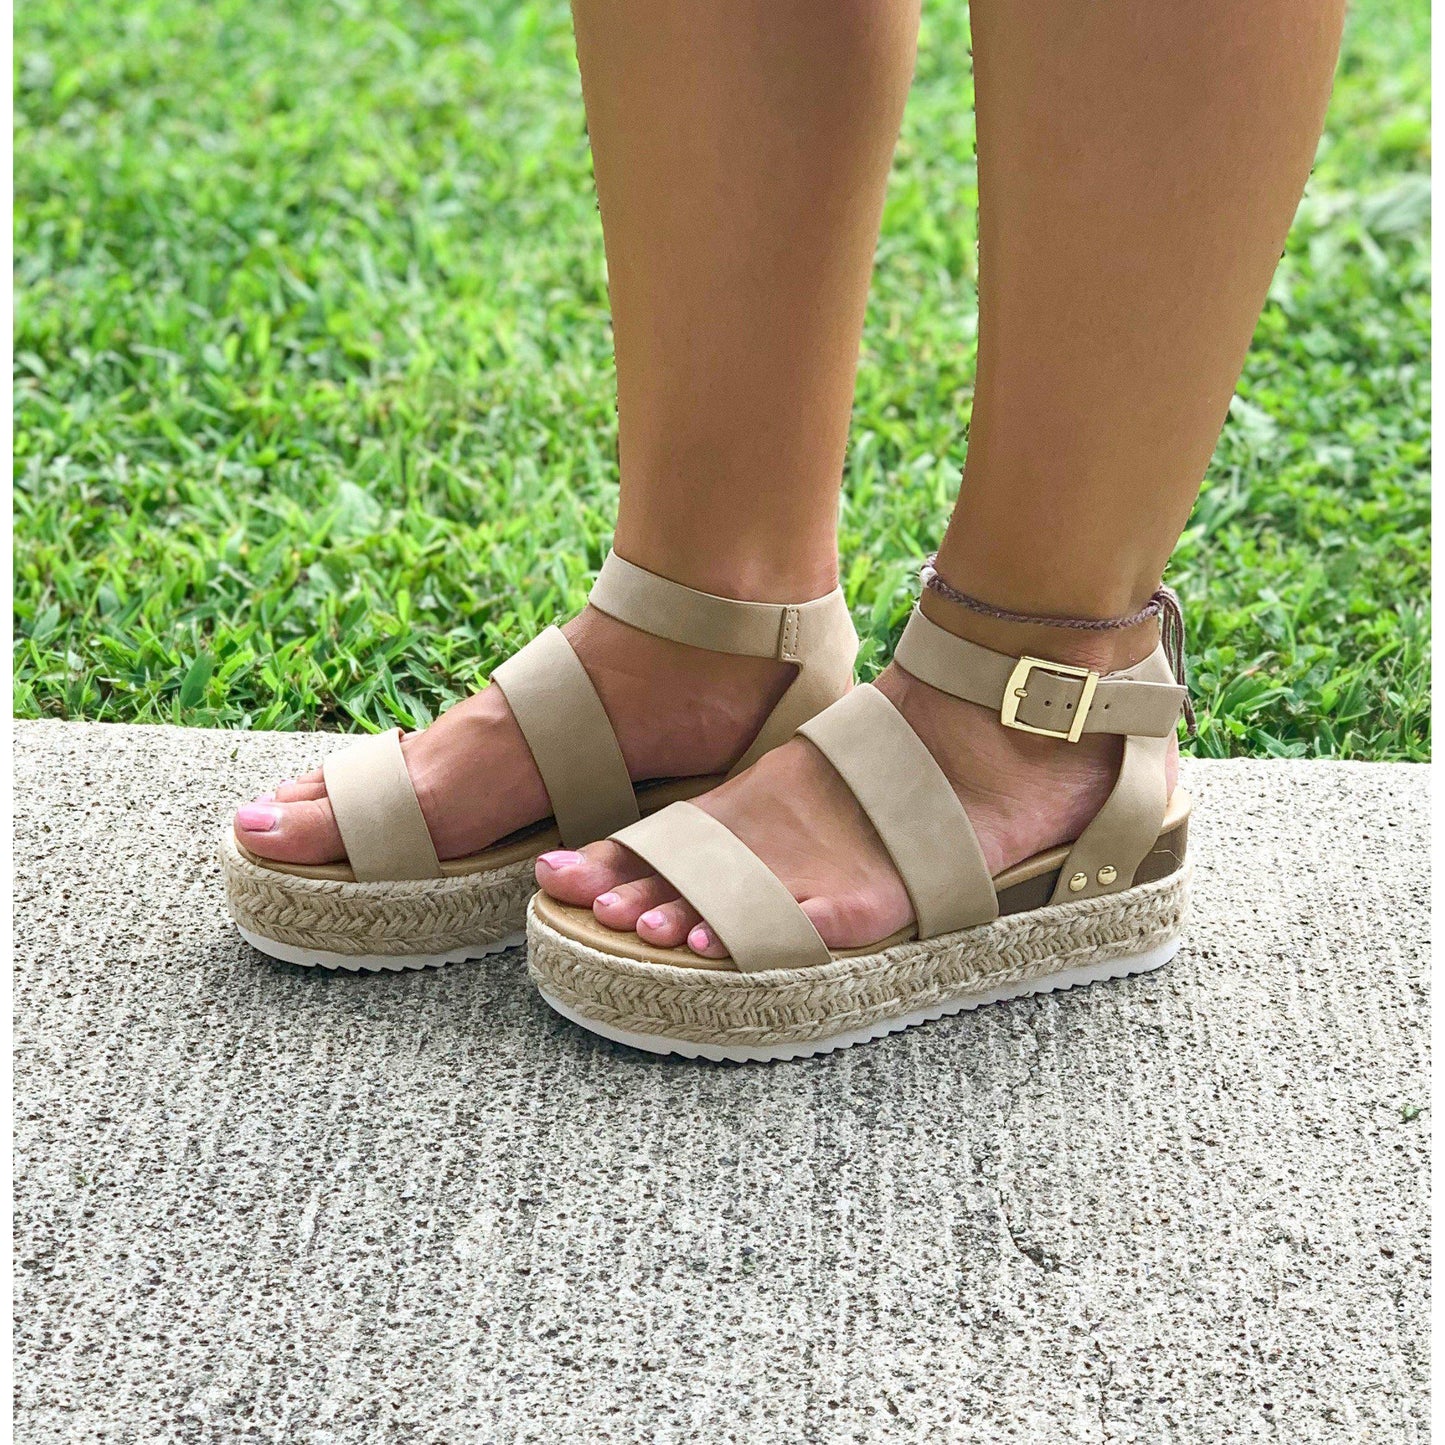 These shoes are the platform an espadrille style. The color taupe is very versatile.